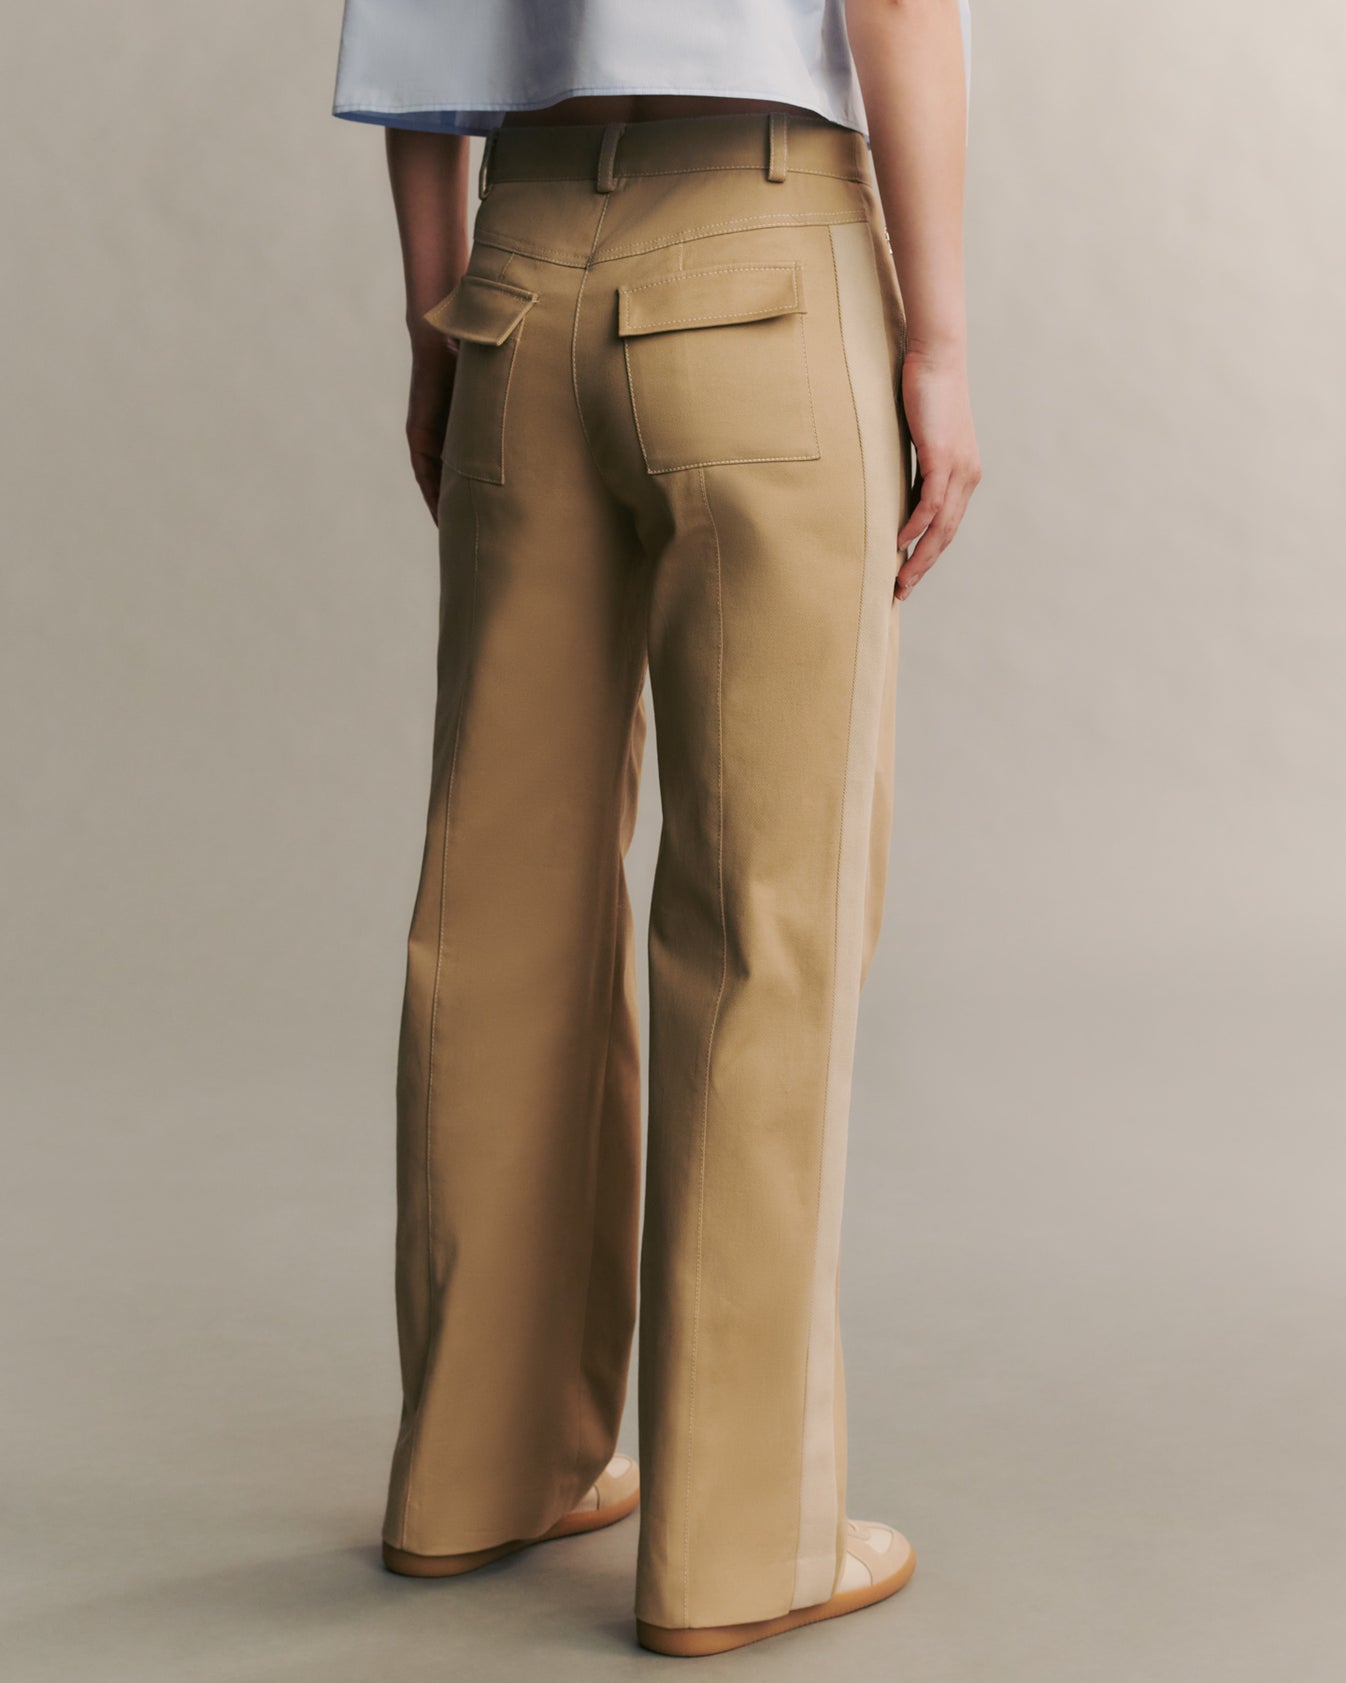 TWP Khaki Isa Pant in stretch cotton twill view 3